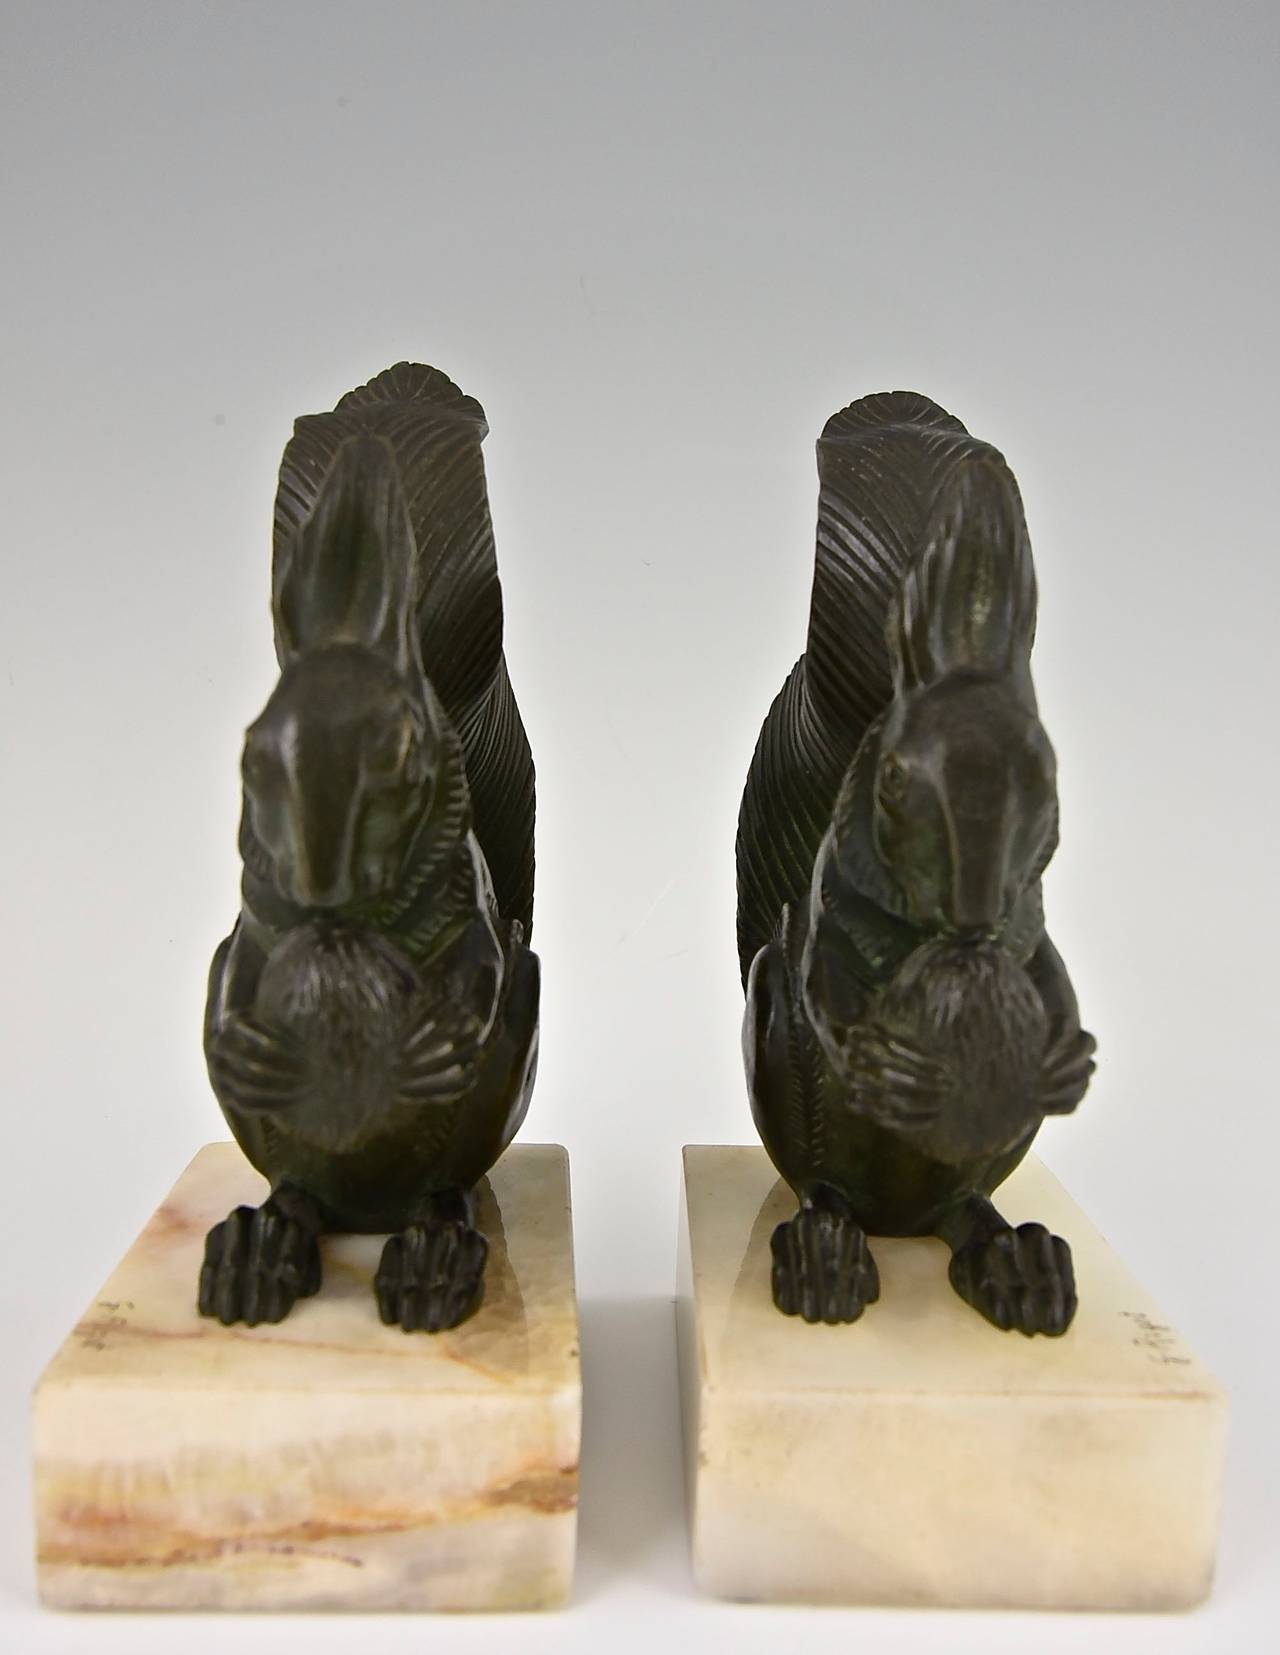 20th Century French Art Deco Bronze Squirrel Bookends by Georges Rigot